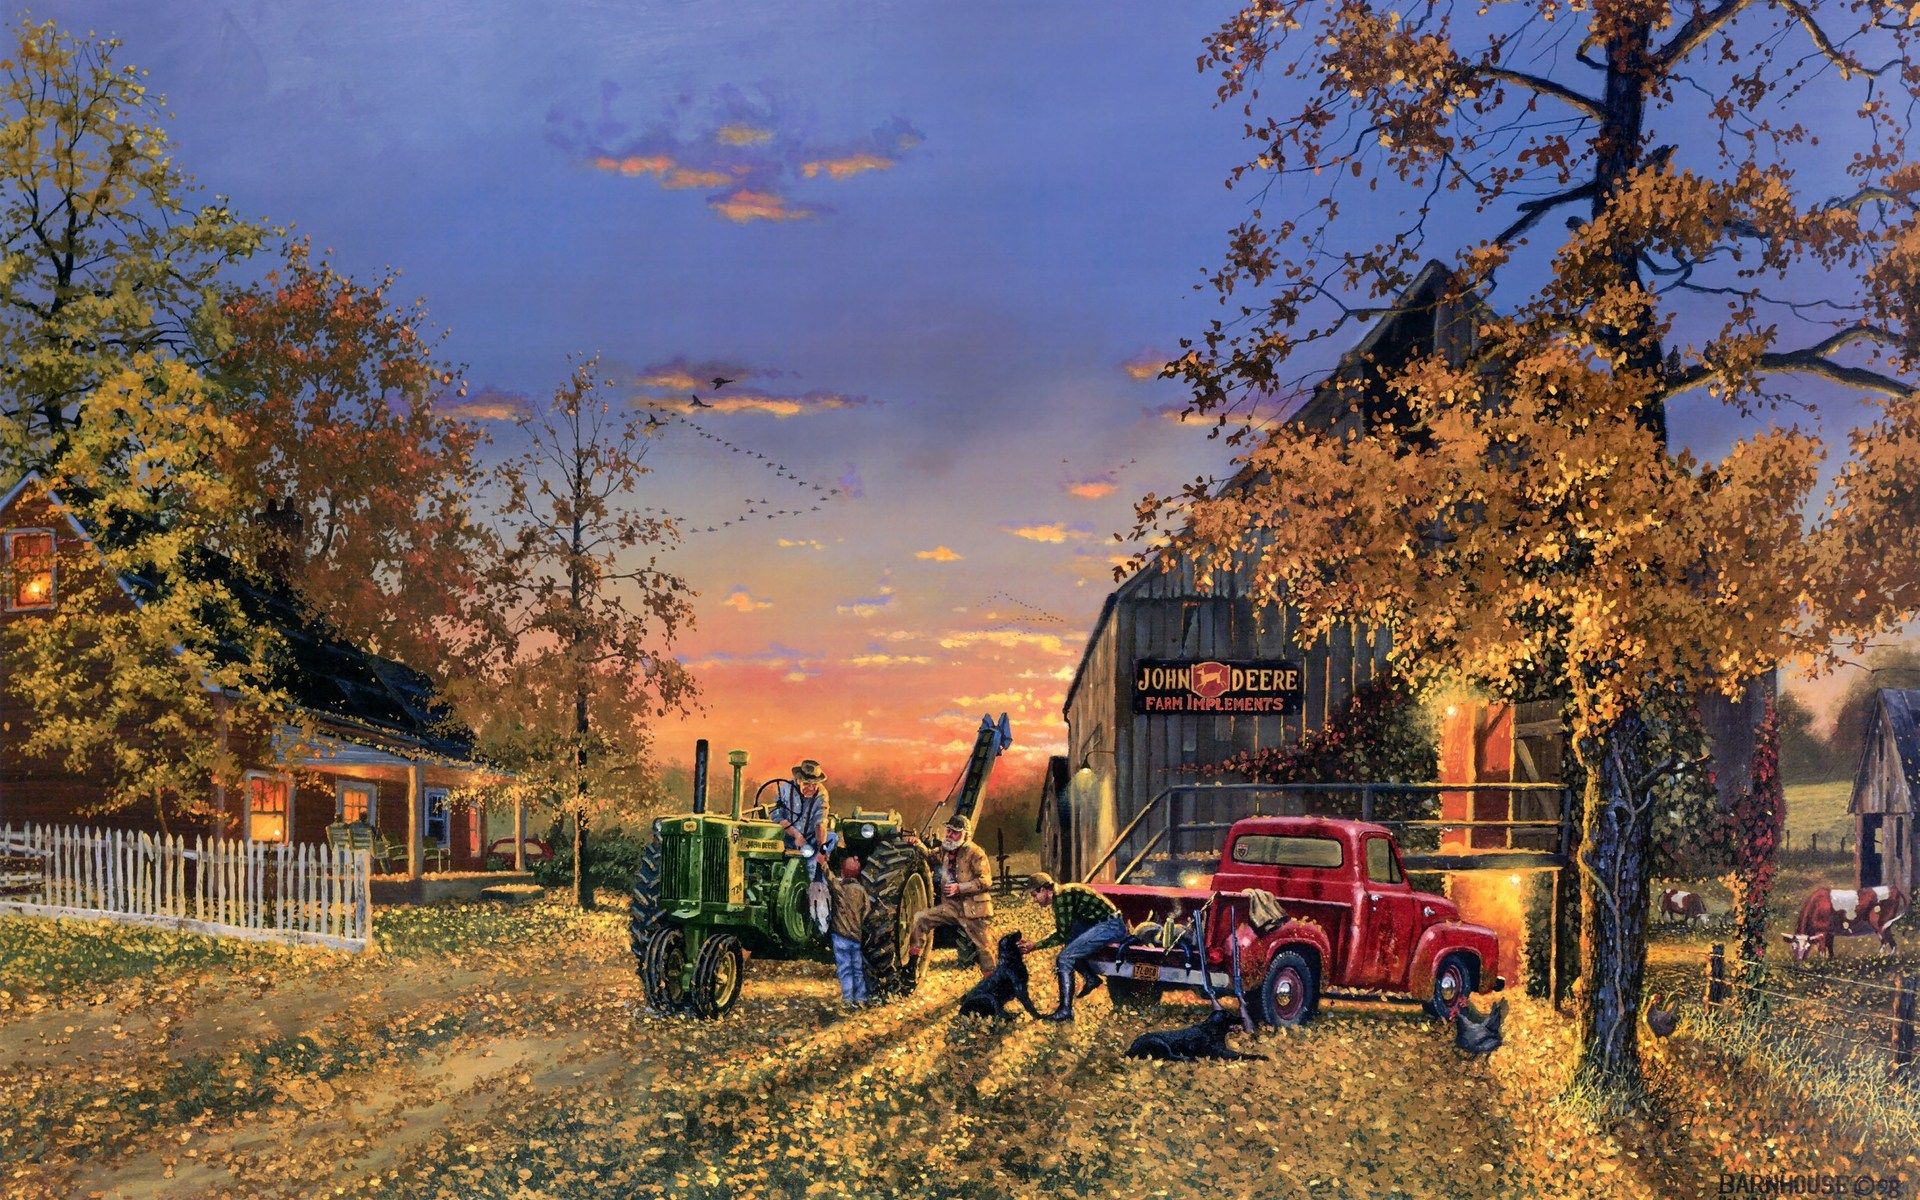 dave barnhouse, Barnhouse, Paintings, Country, Artistic, Farm, Vehicles, Tractor, People, Landscapes, Autumn, Fall, Seasons, Holidays, Thanksgiving Wallpaper HD / Desktop and Mobile Background